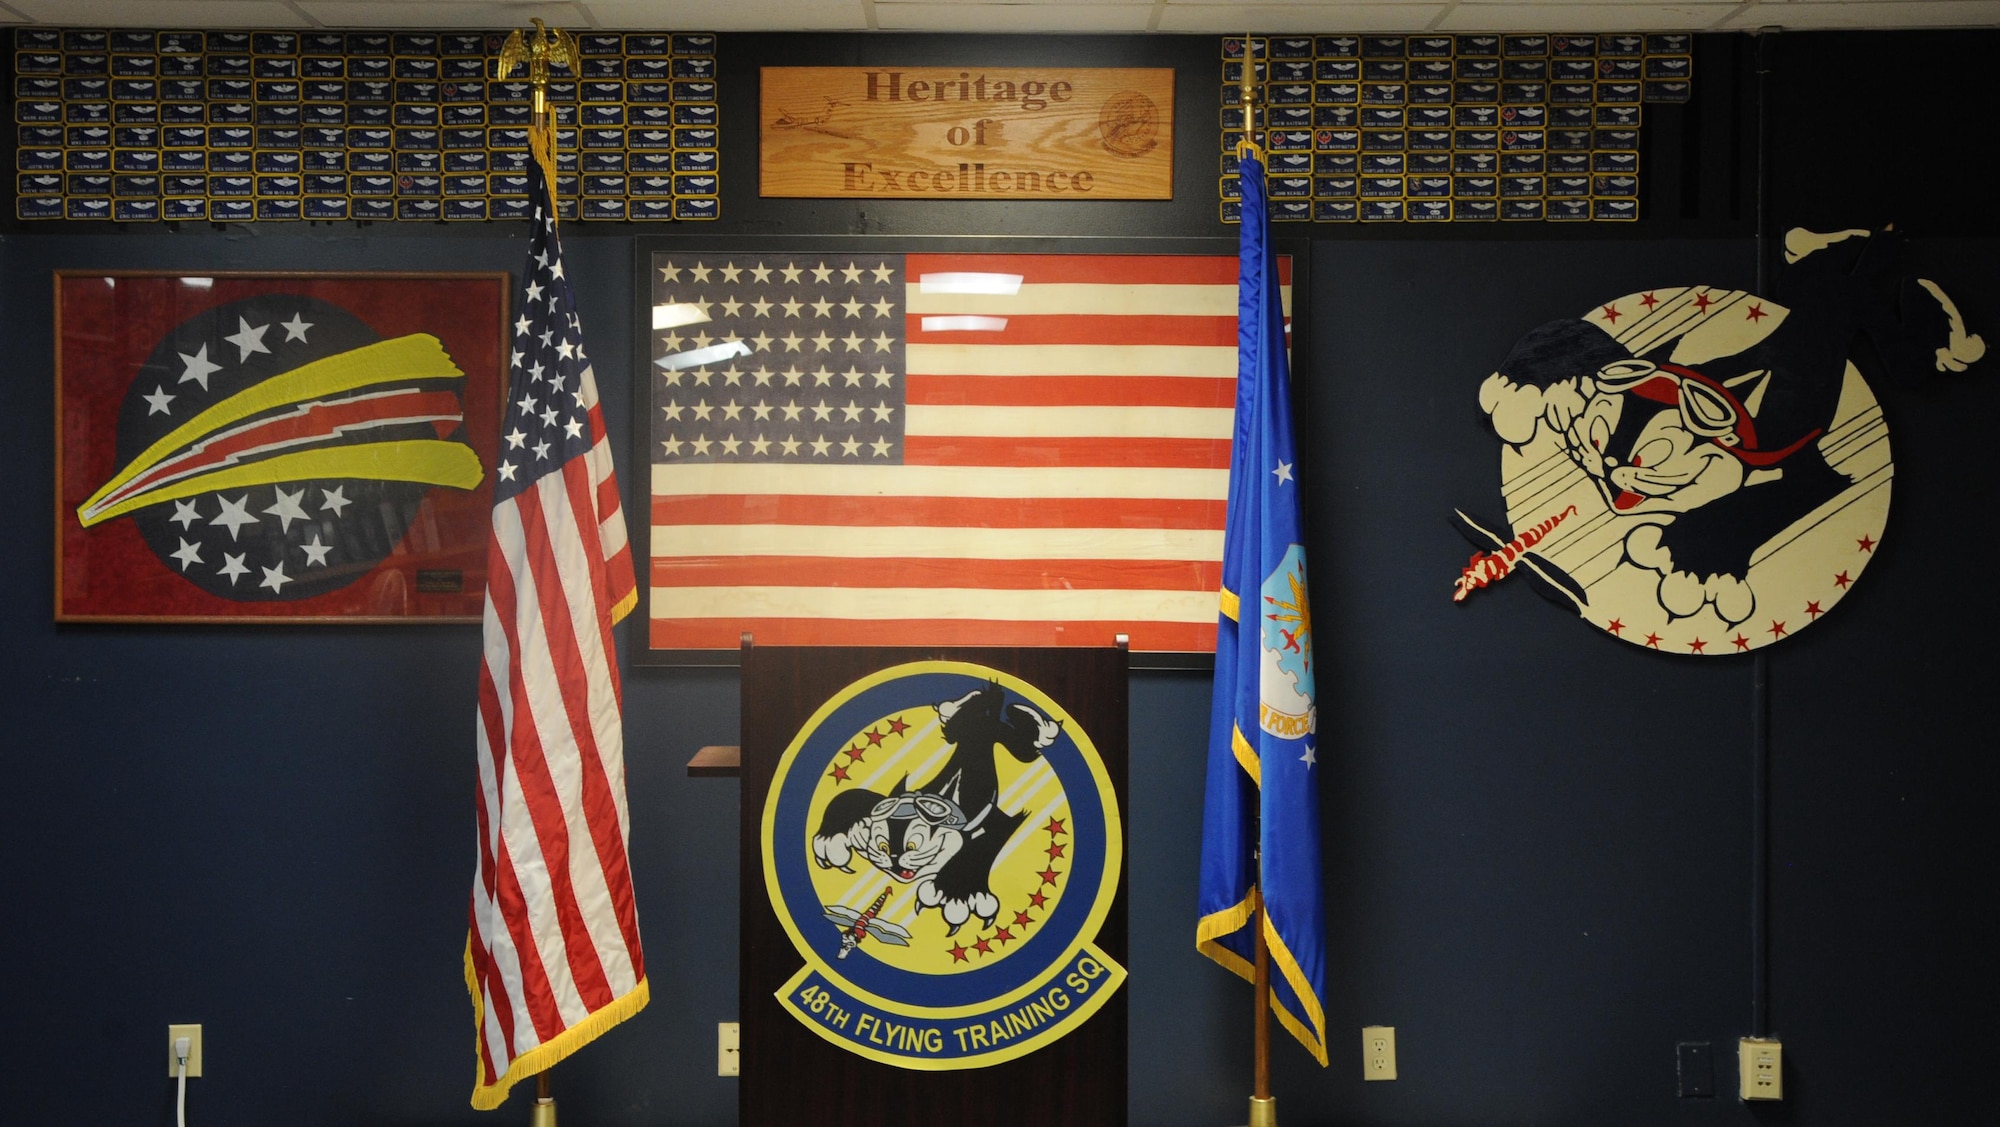 The front of the 48th Flying Training Squadron’s Heritage Room shows the 48th Fighter Interceptor Squadron patch on the left of the American flag and the World War II 48th Pursuit Squadron patch designed by Disney Studios on the right and the current 48th Flying Training Squadron emblem below it. Walt Disney’s team of artists created the patch along with many others for various units as a way to contribute to service members during World War II. (U.S Air Force photo by Airman 1st Class Beaux Hebert)